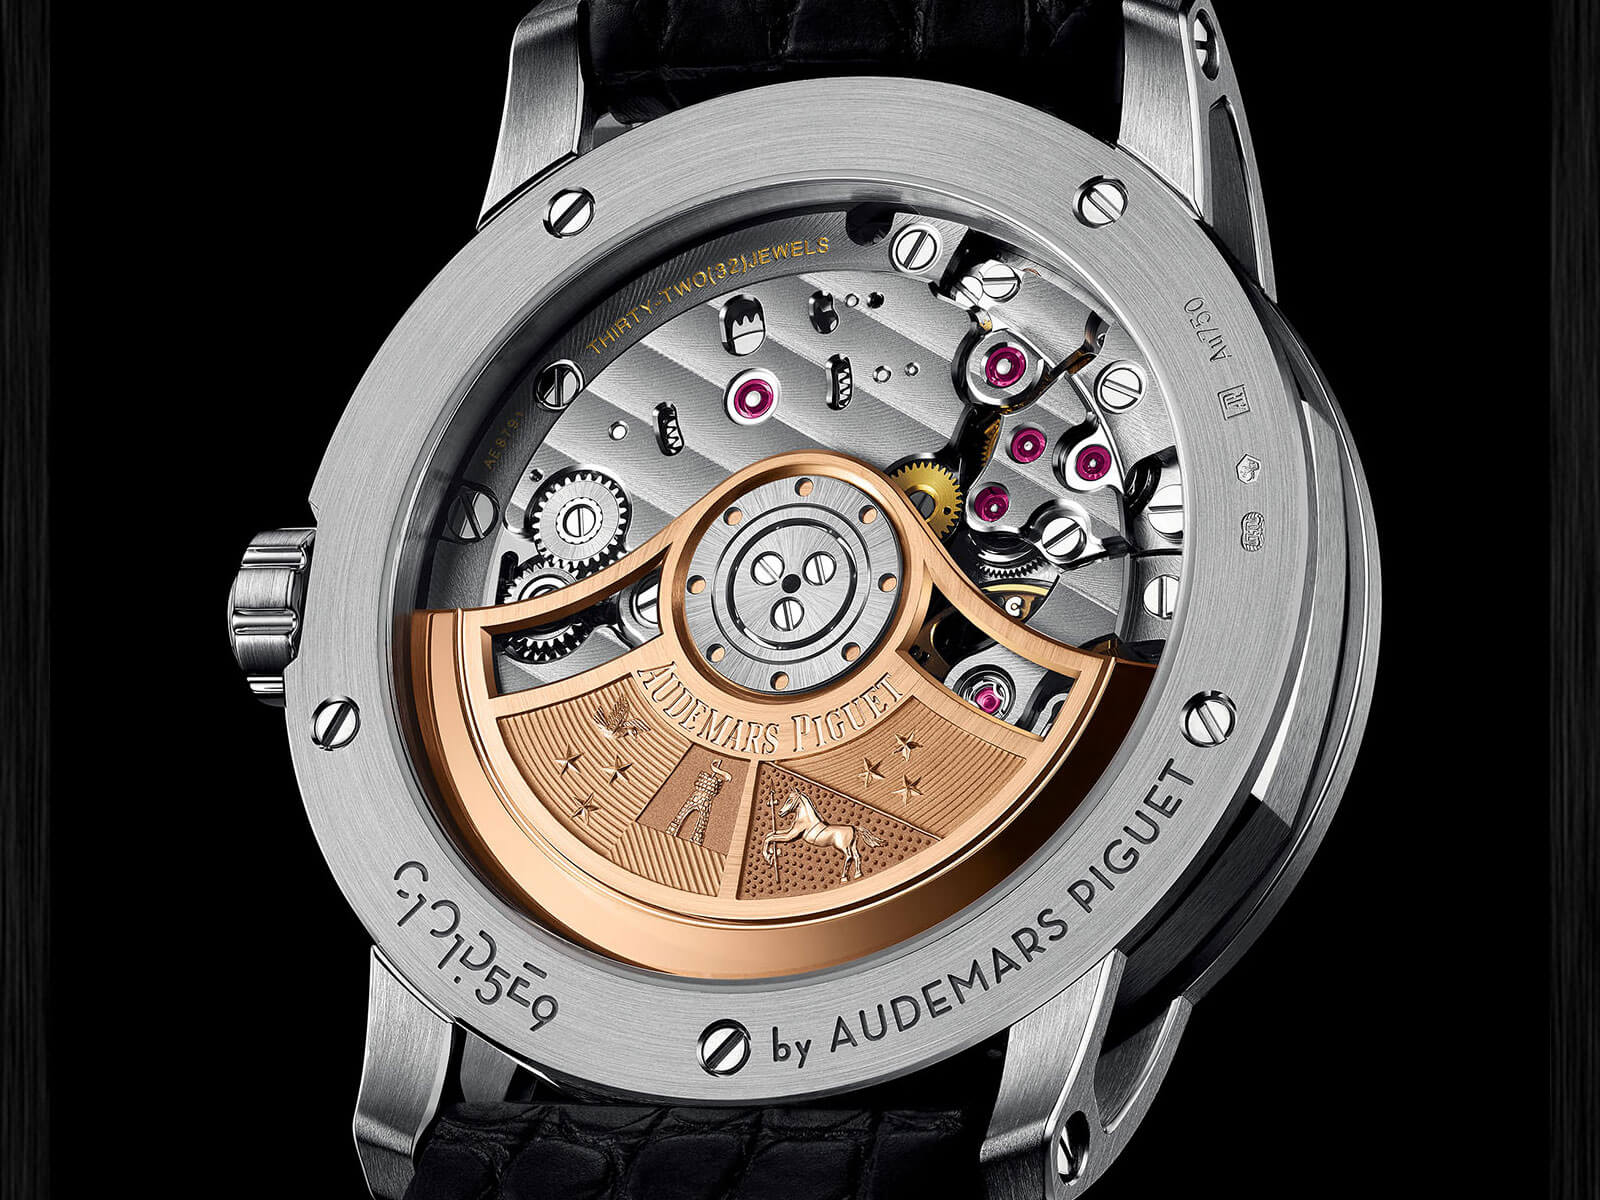 Code 11.59 by Audemars Piguet 15210BC.OO.A002KB.01 Glare-proofed Sapphire Crystal Case Back